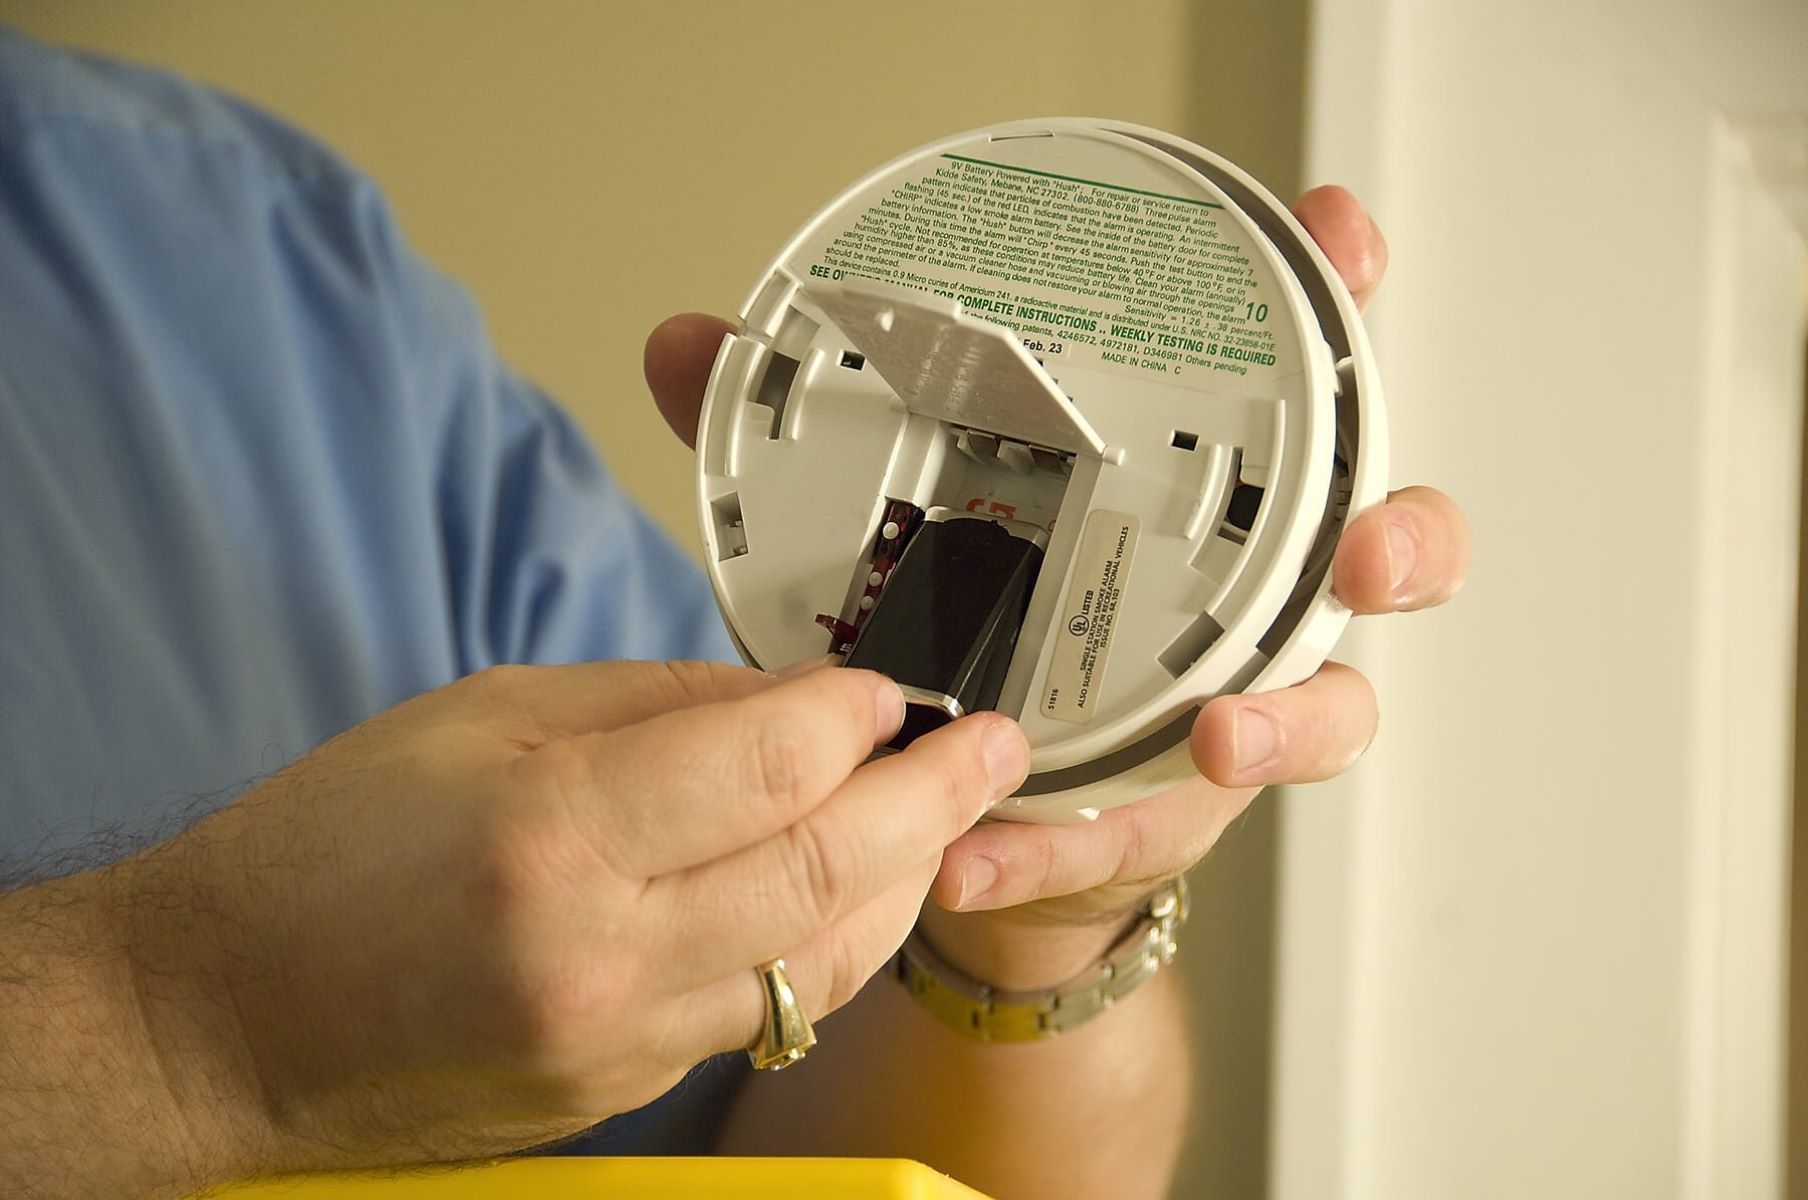 Fire Safety First: Changing Your Fire Alarm Battery